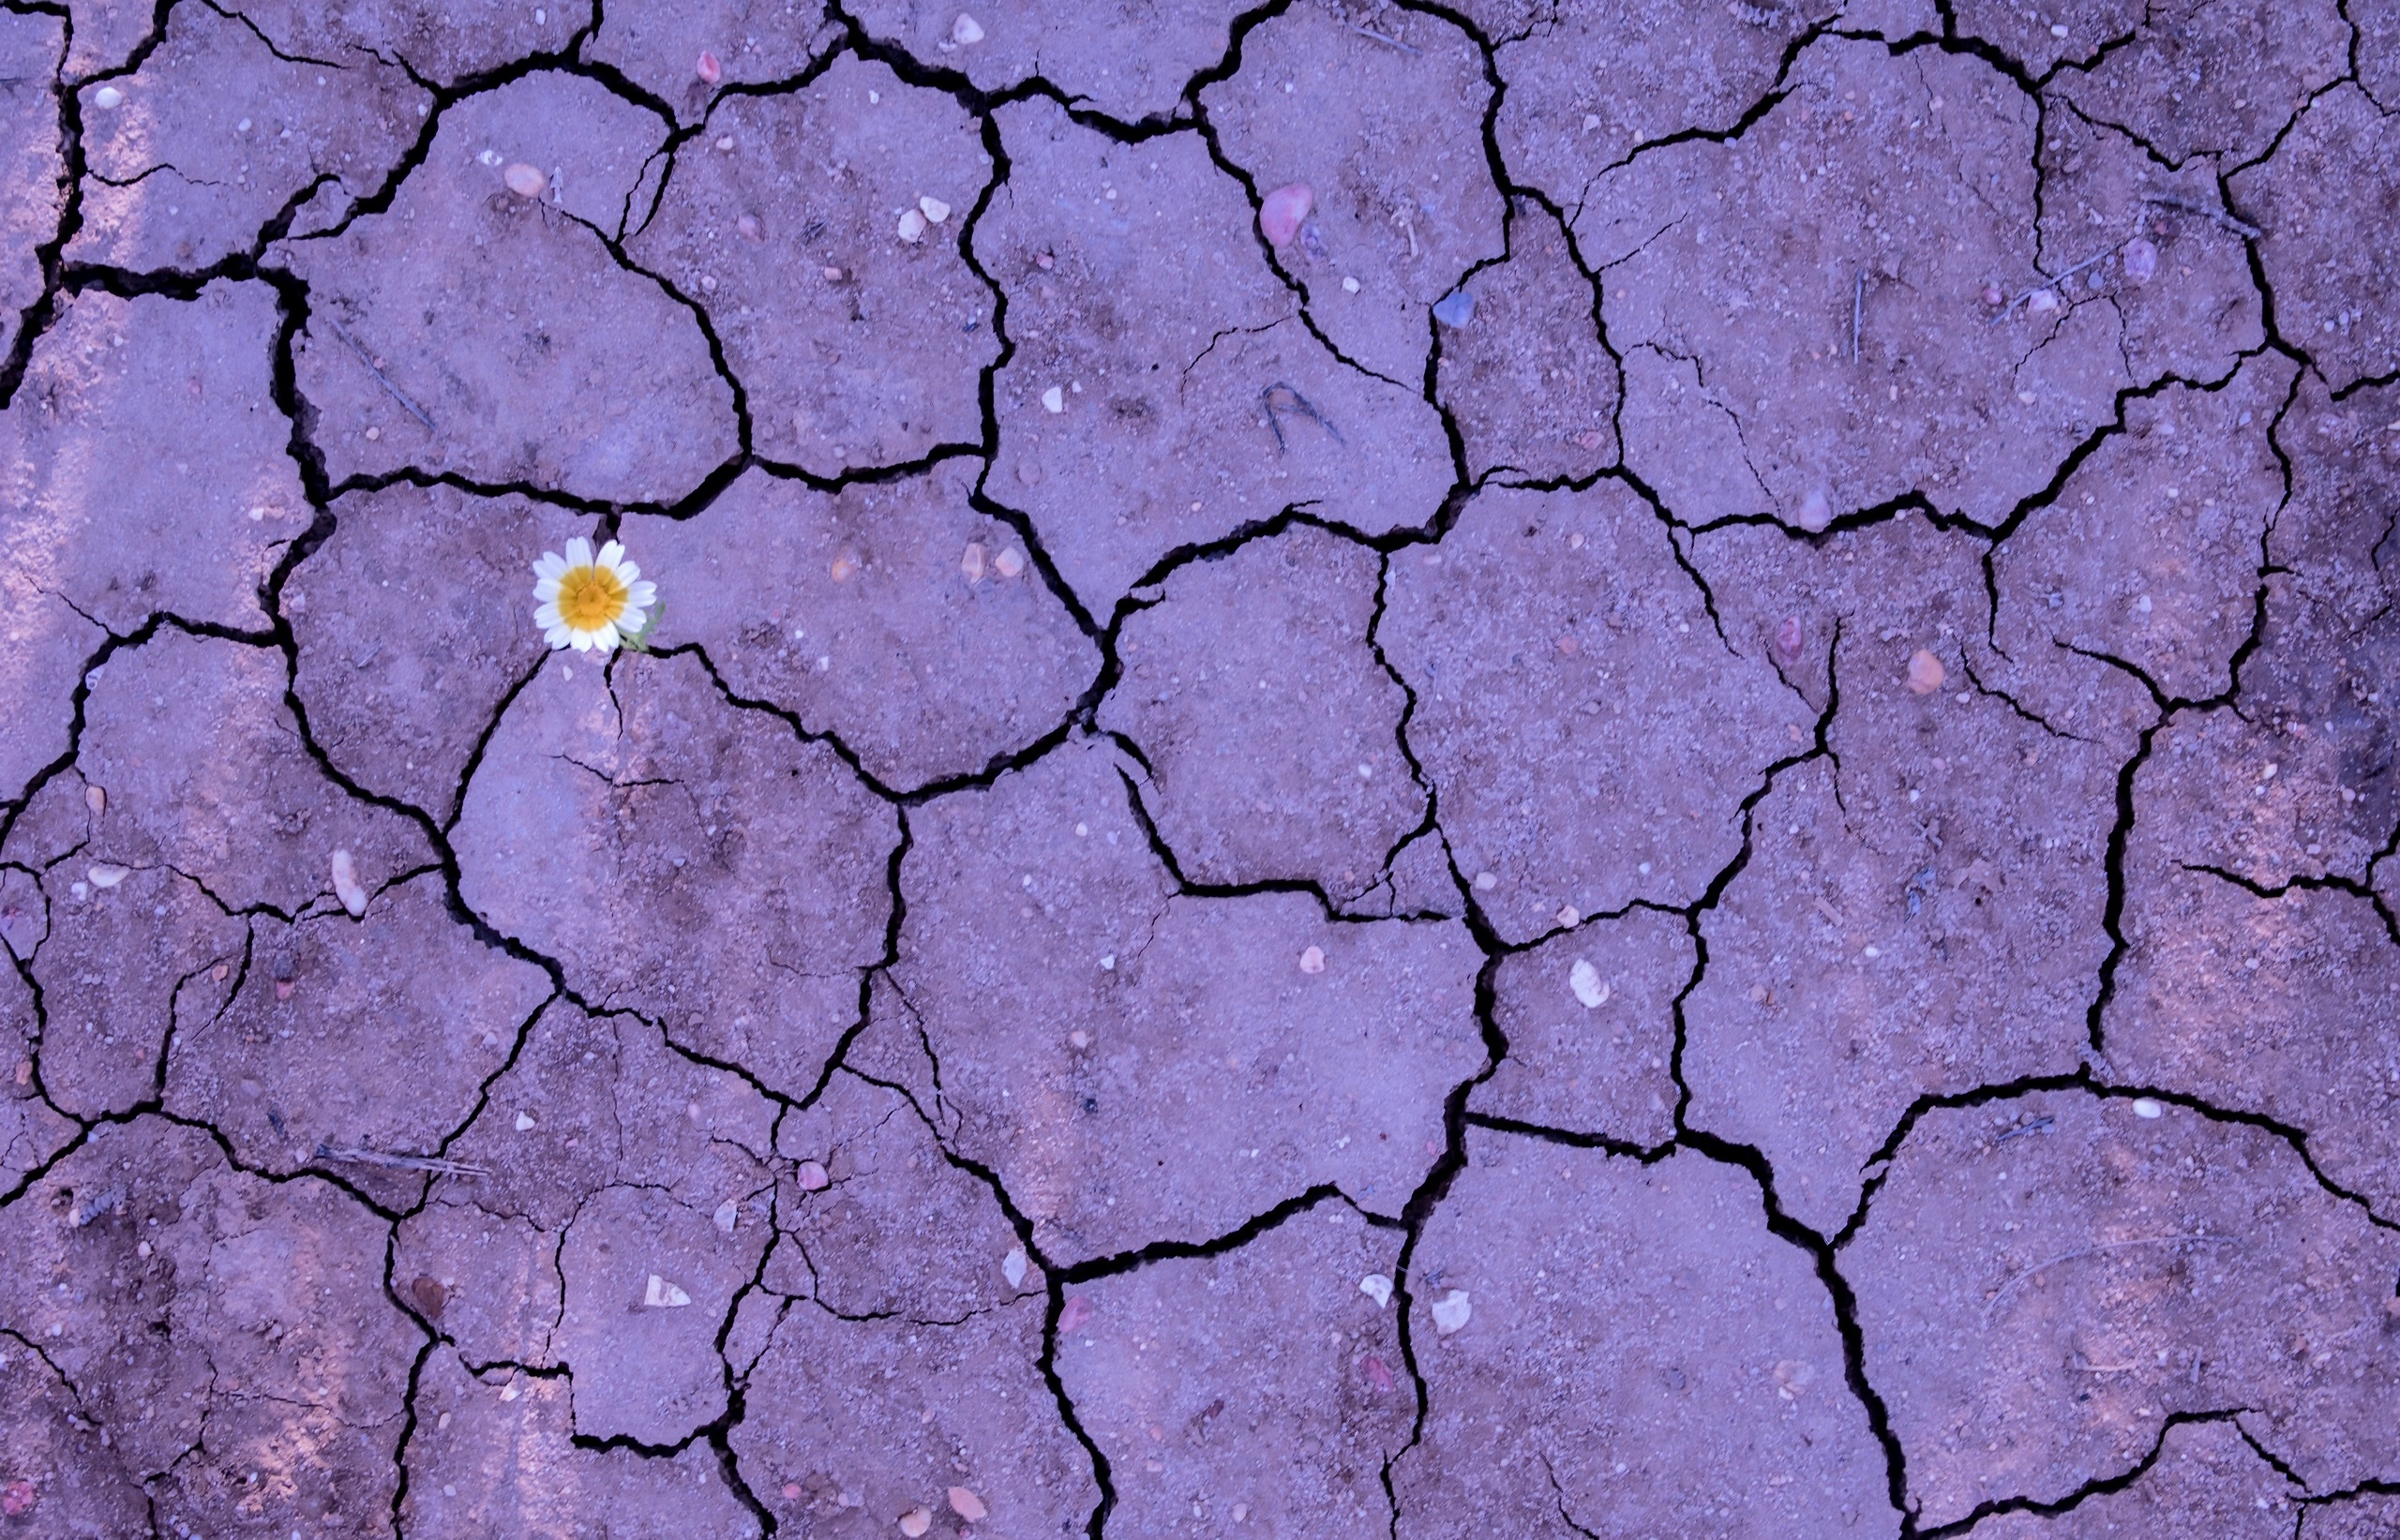 A flower sprouted on the dried soil